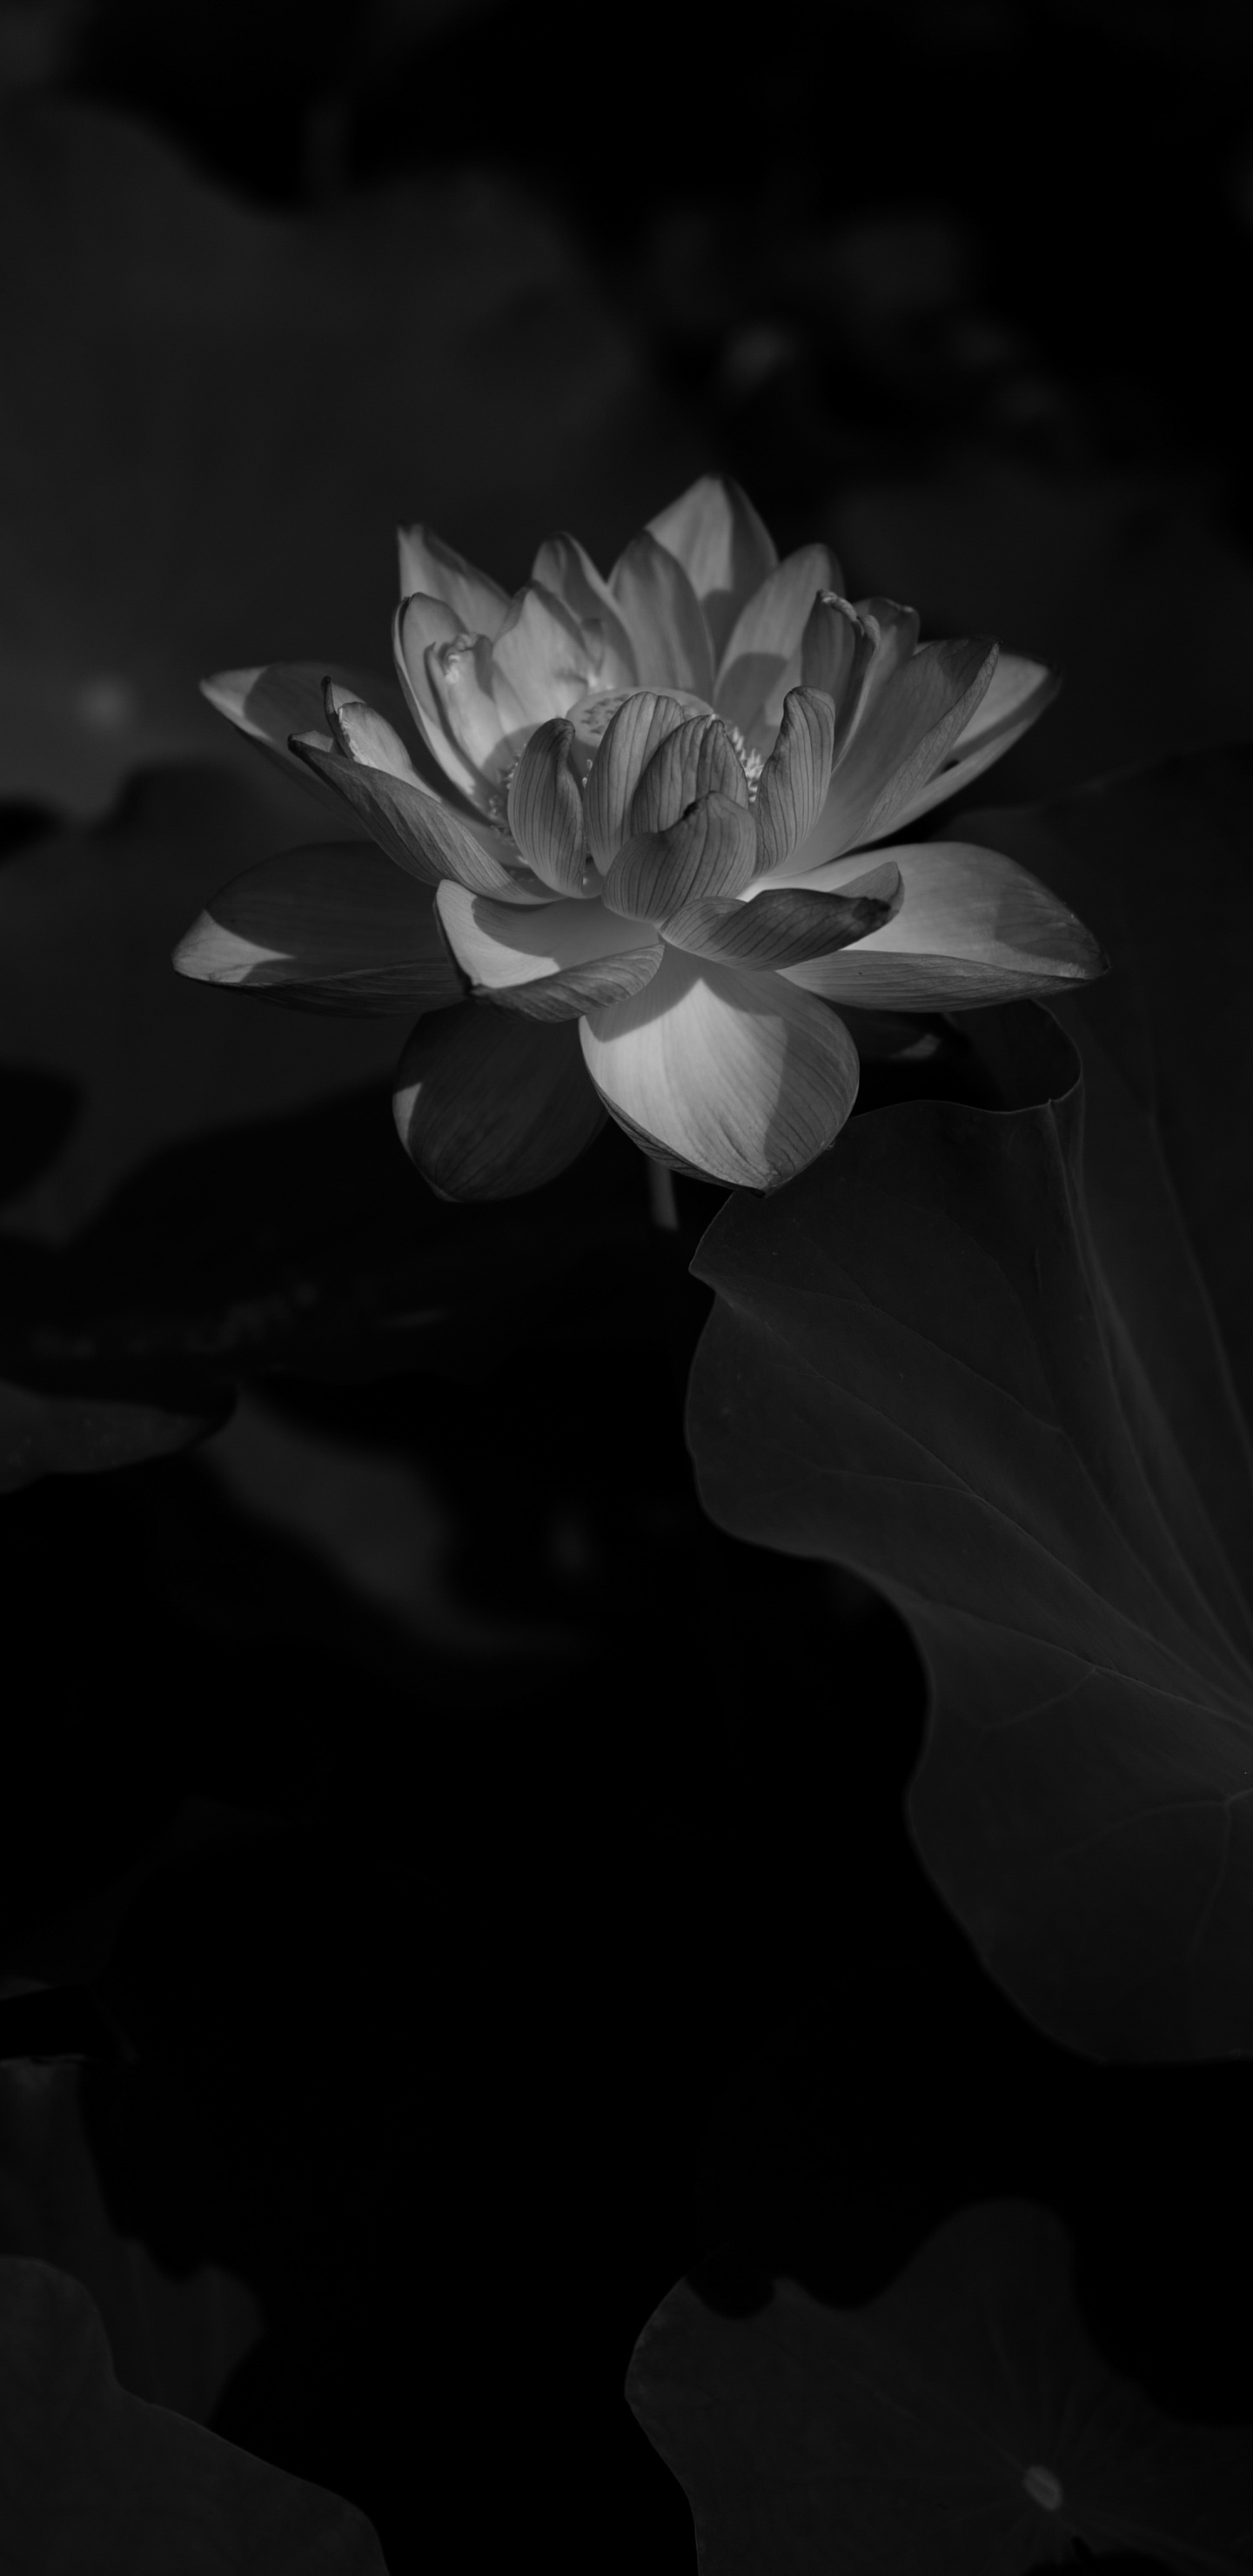 Grayscale Photo of a Flower. Wallpaper in 1440x2960 Resolution